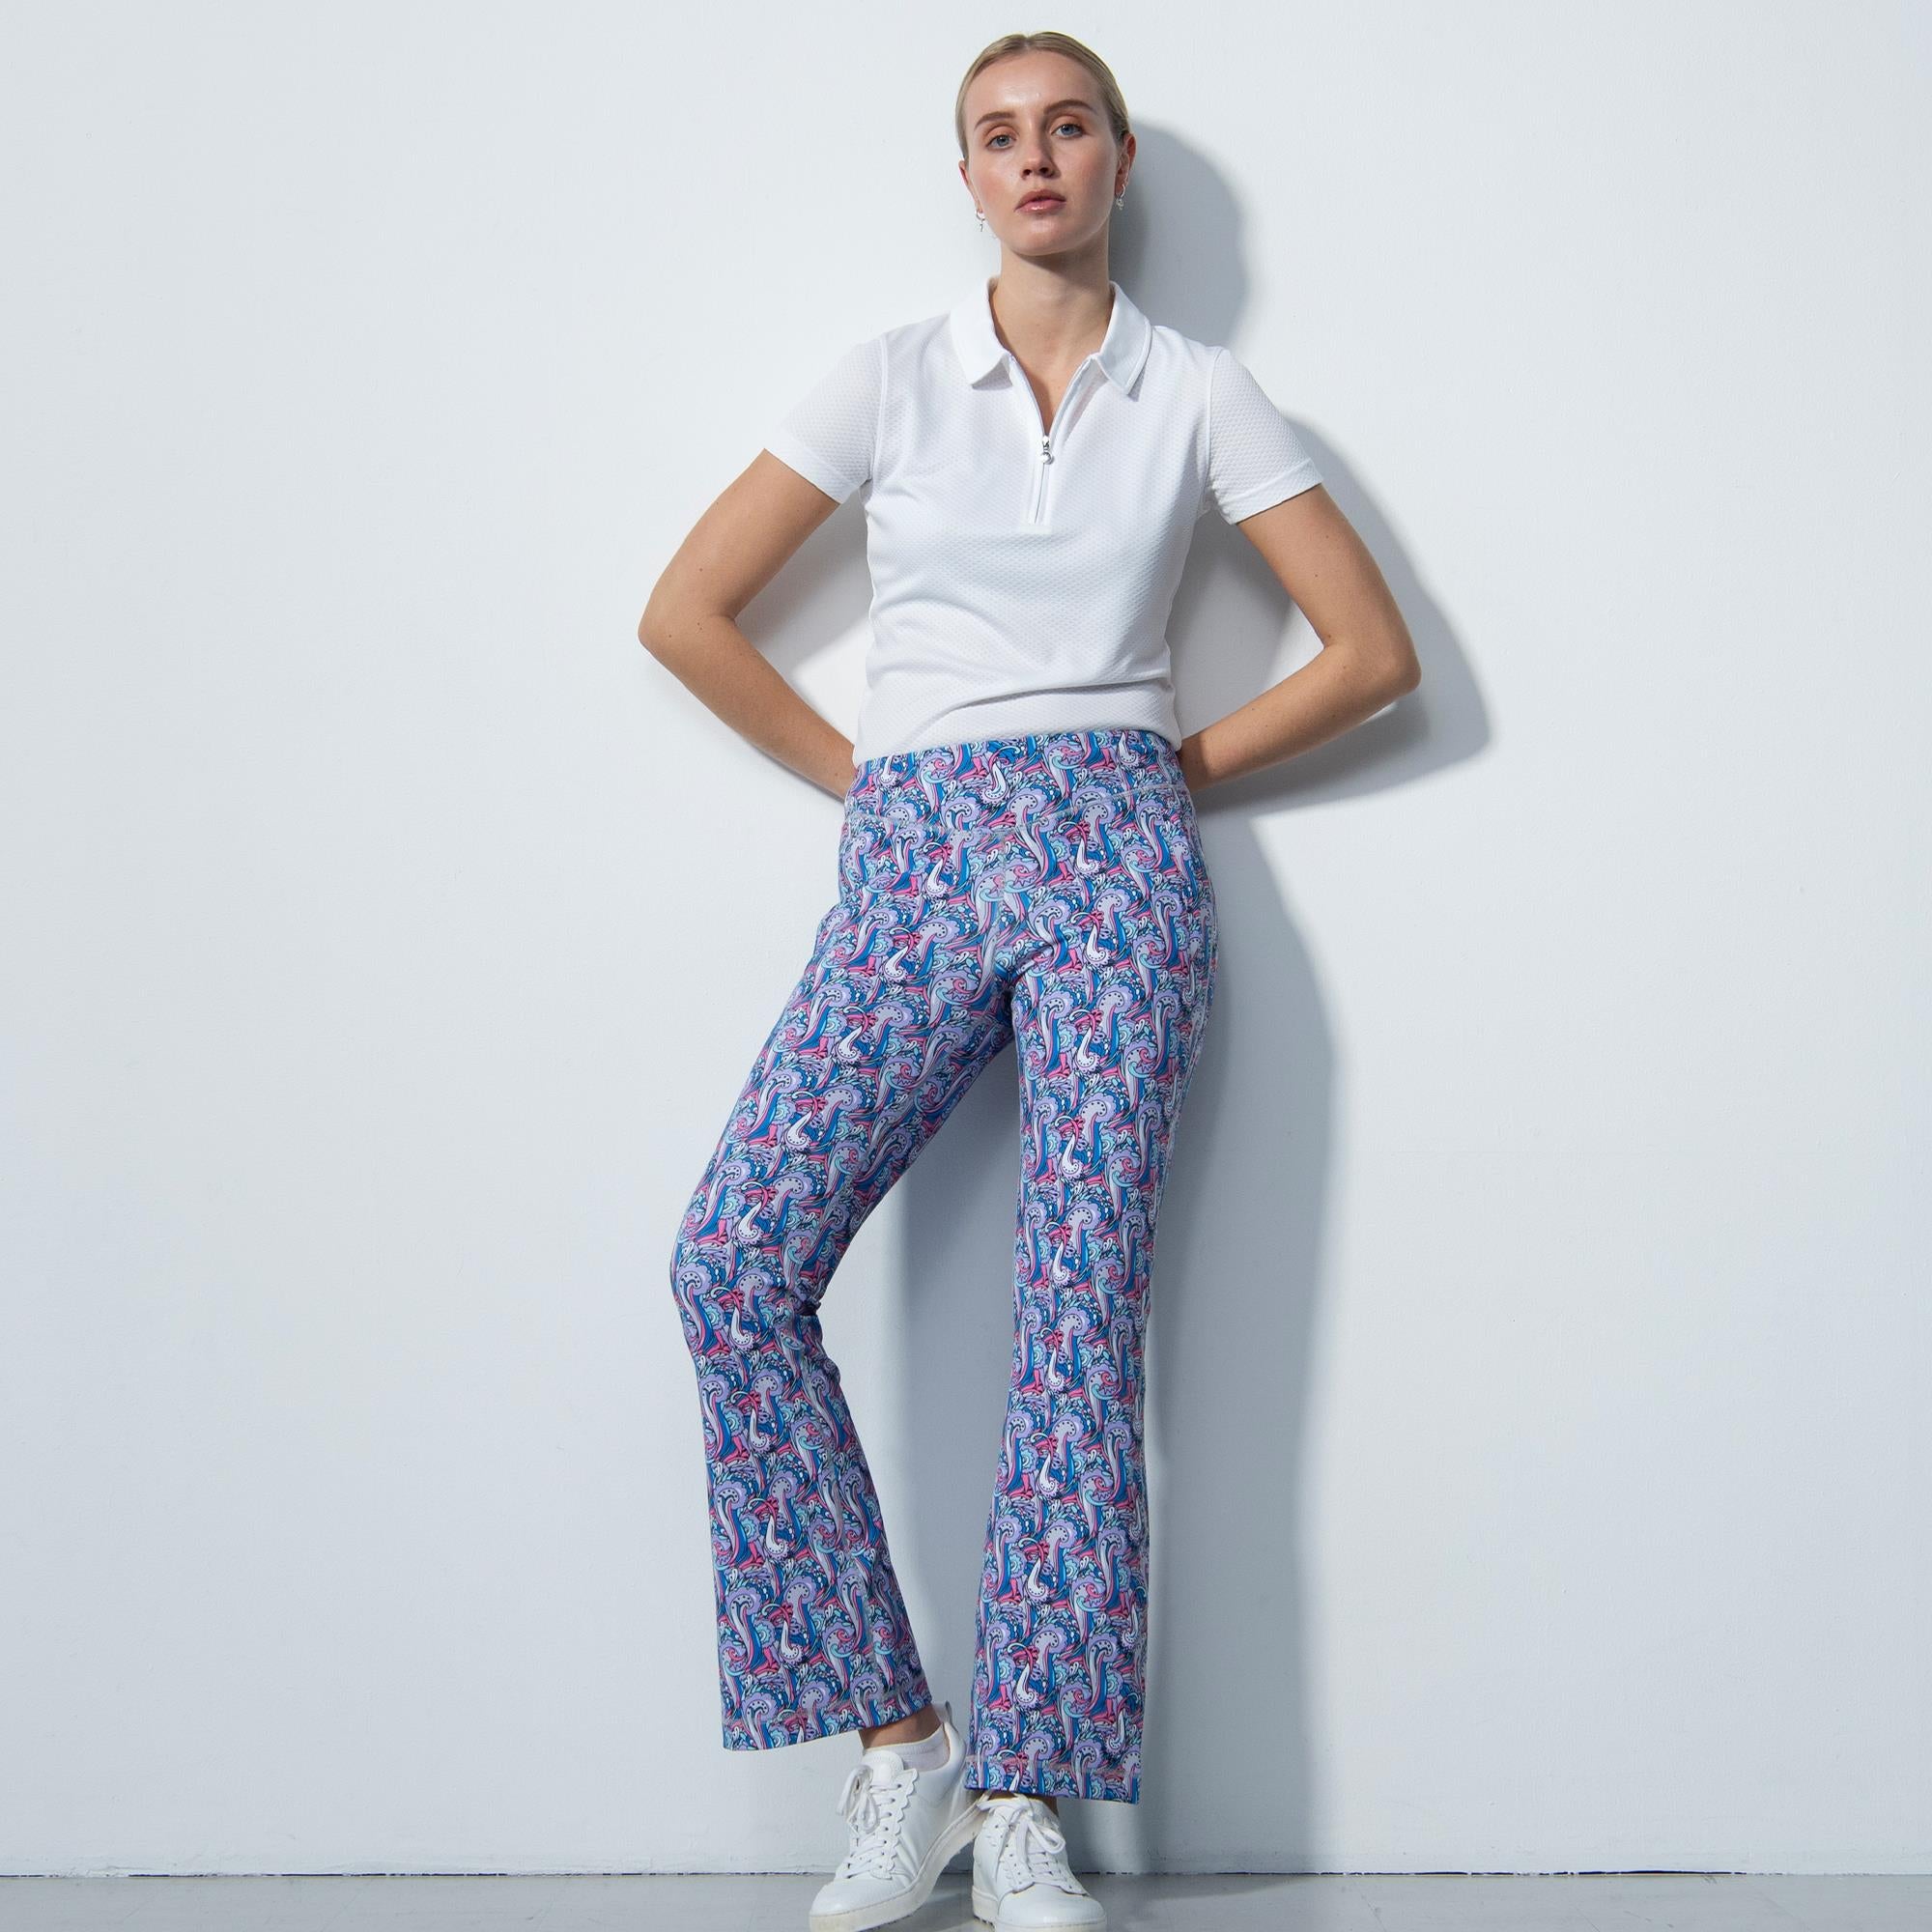 Studio shot of blonde woman modelling Daily Sports patterned flared trousers in purple, pink and blue, with a white plain polo shirt  